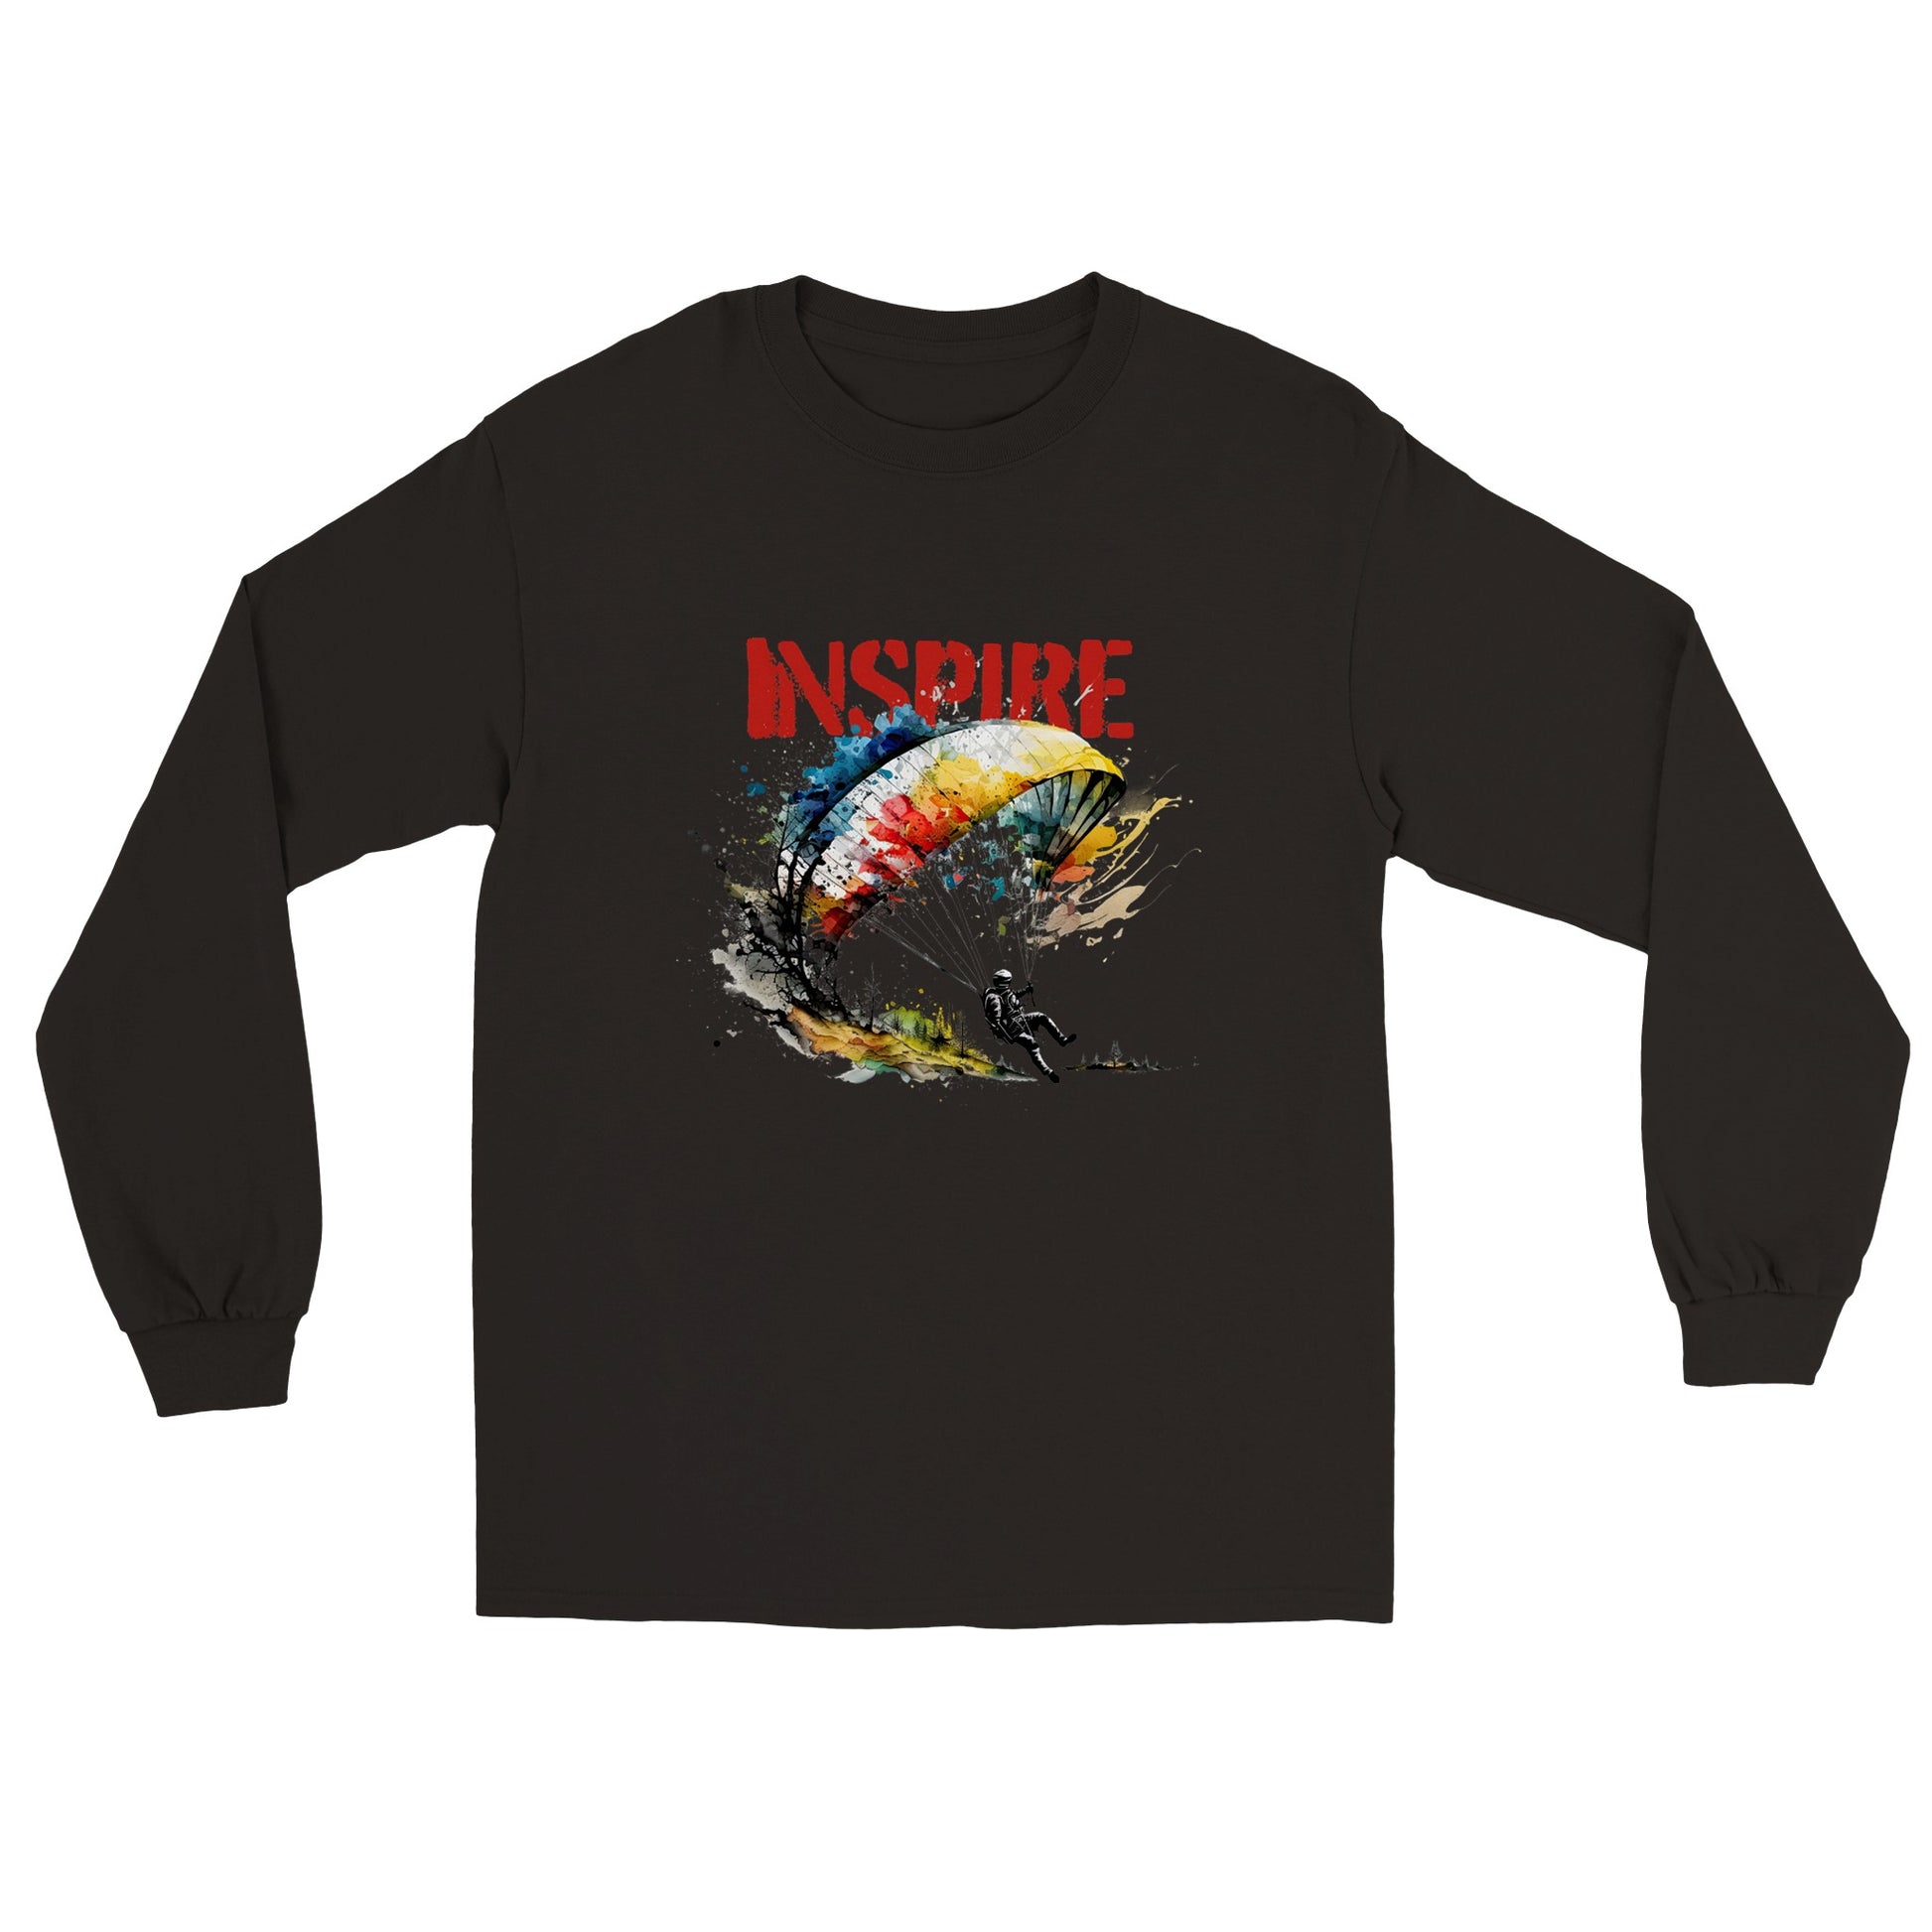 Black long sleeve t-shirt with a paraglider graphic and Inspire caption